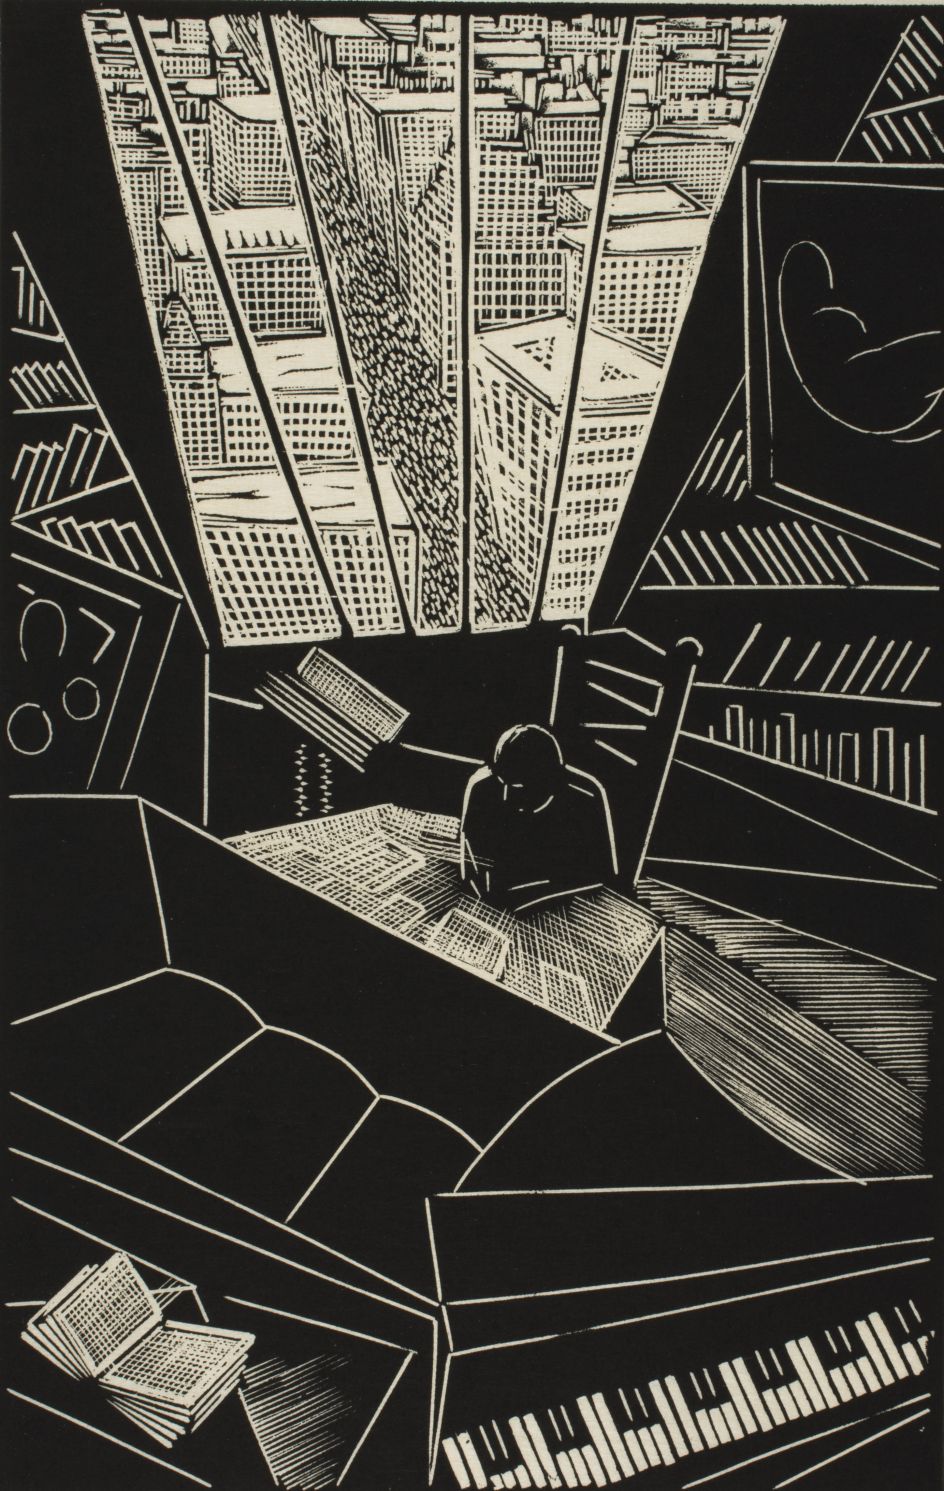 Of a Great City, 1923, by Wharton H. Esherick, American, 1887 - 1970. Wood engraving, image: 9 15/16 x 6 5/16 inches, sheet: 11 7/16 x 7 1/2 inches. Philadelphia Museum of Art: Purchased with the Lola Downin Peck Fund from the Carl and Laura Zigrosser Collection, 1979-12-11